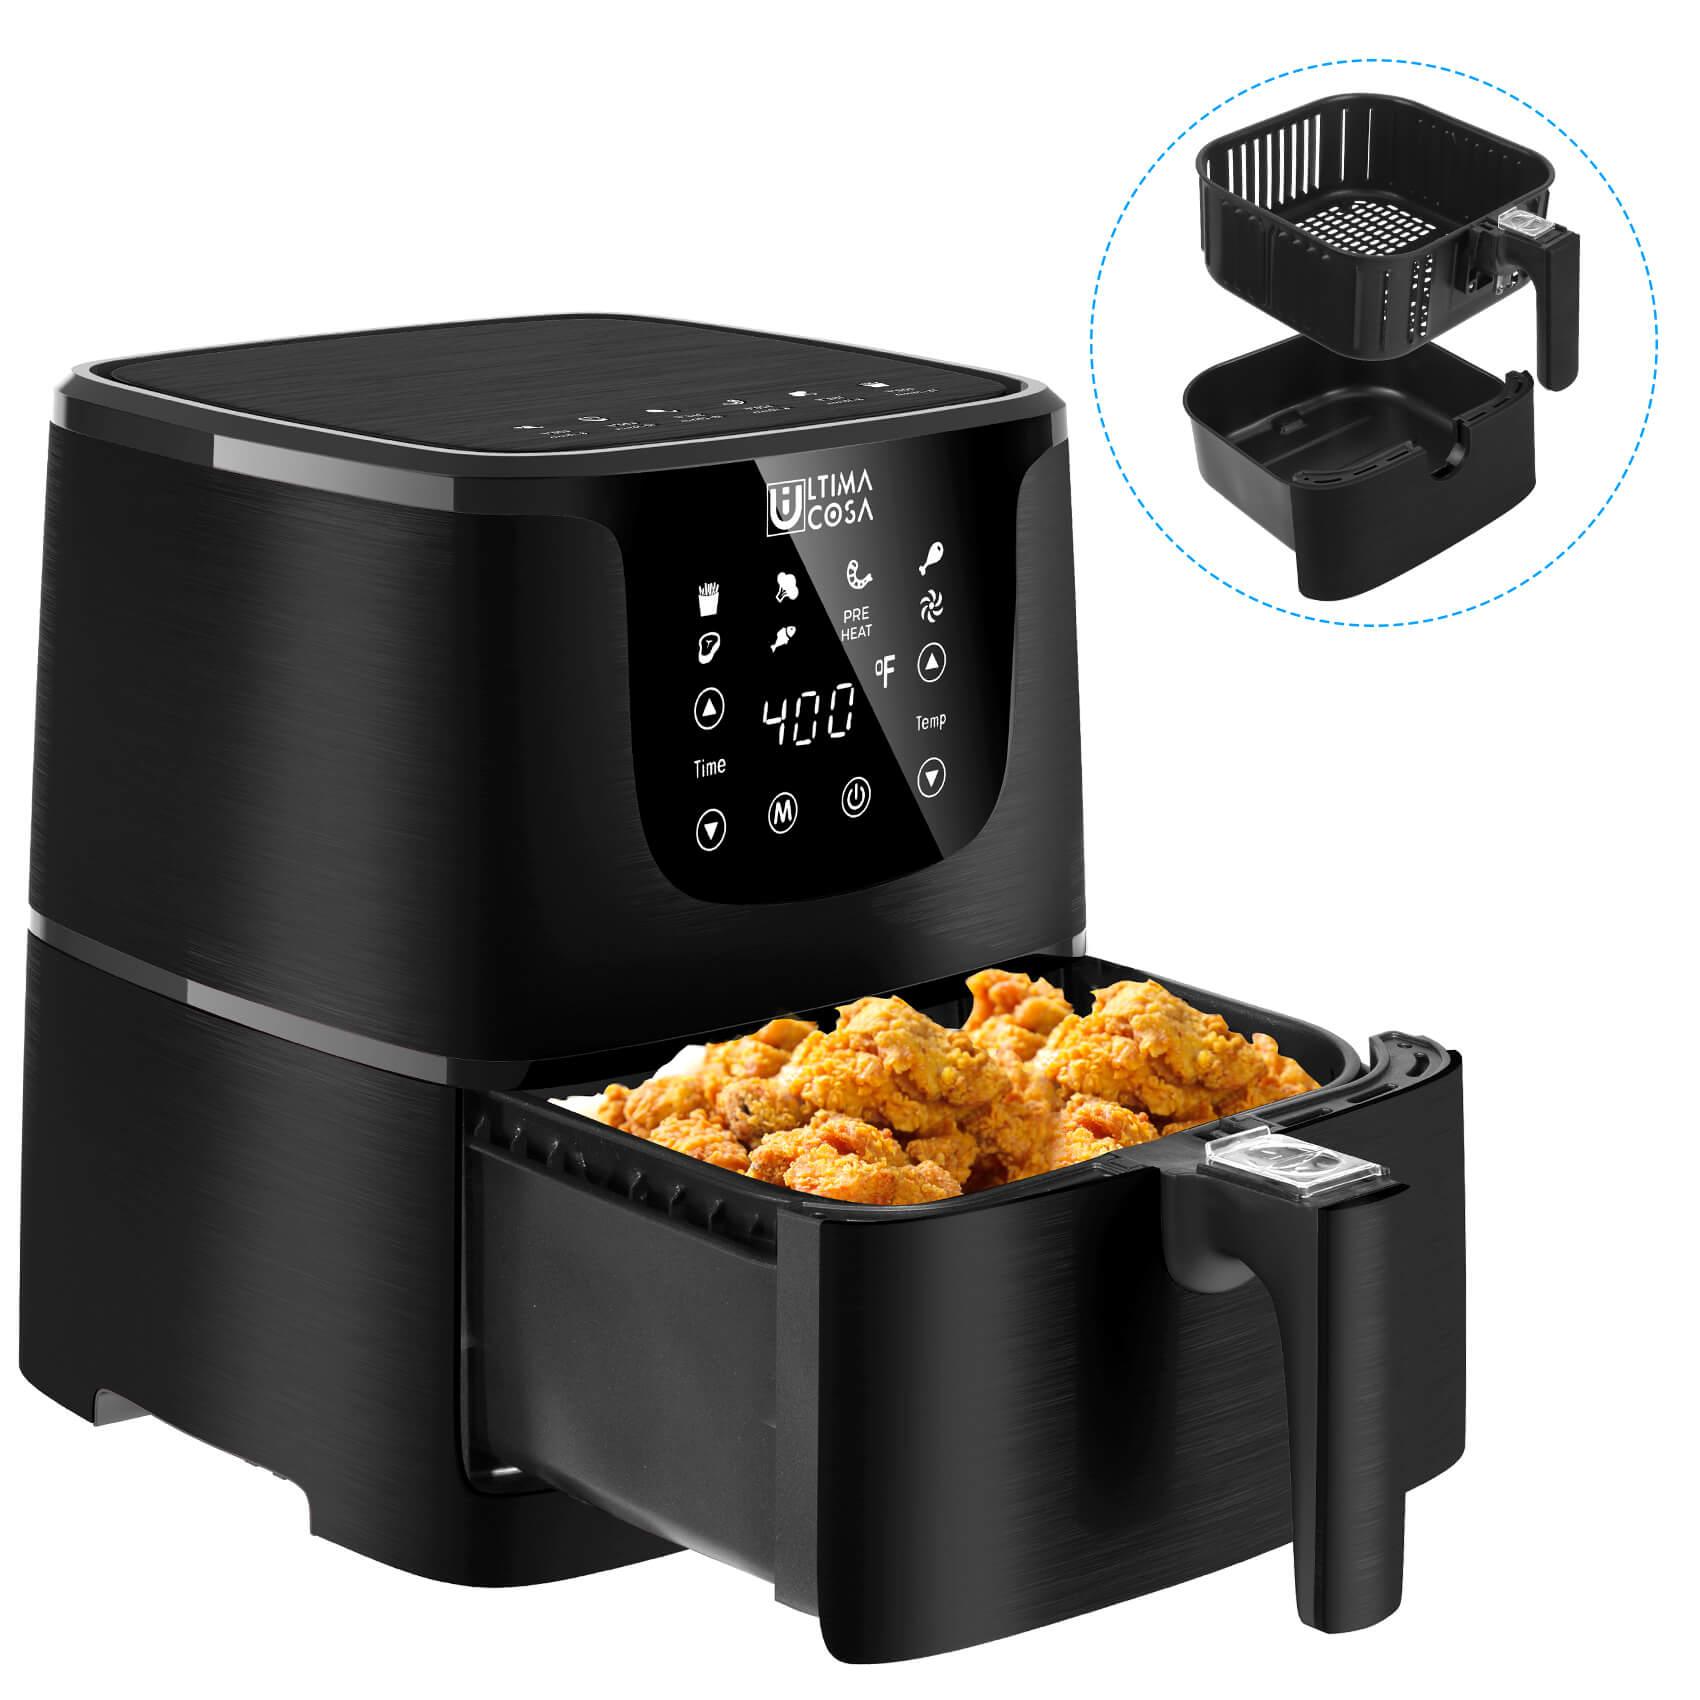  Electric Large Hot Air Fryer Oven | Best Air Fryer | Ultima Cosa